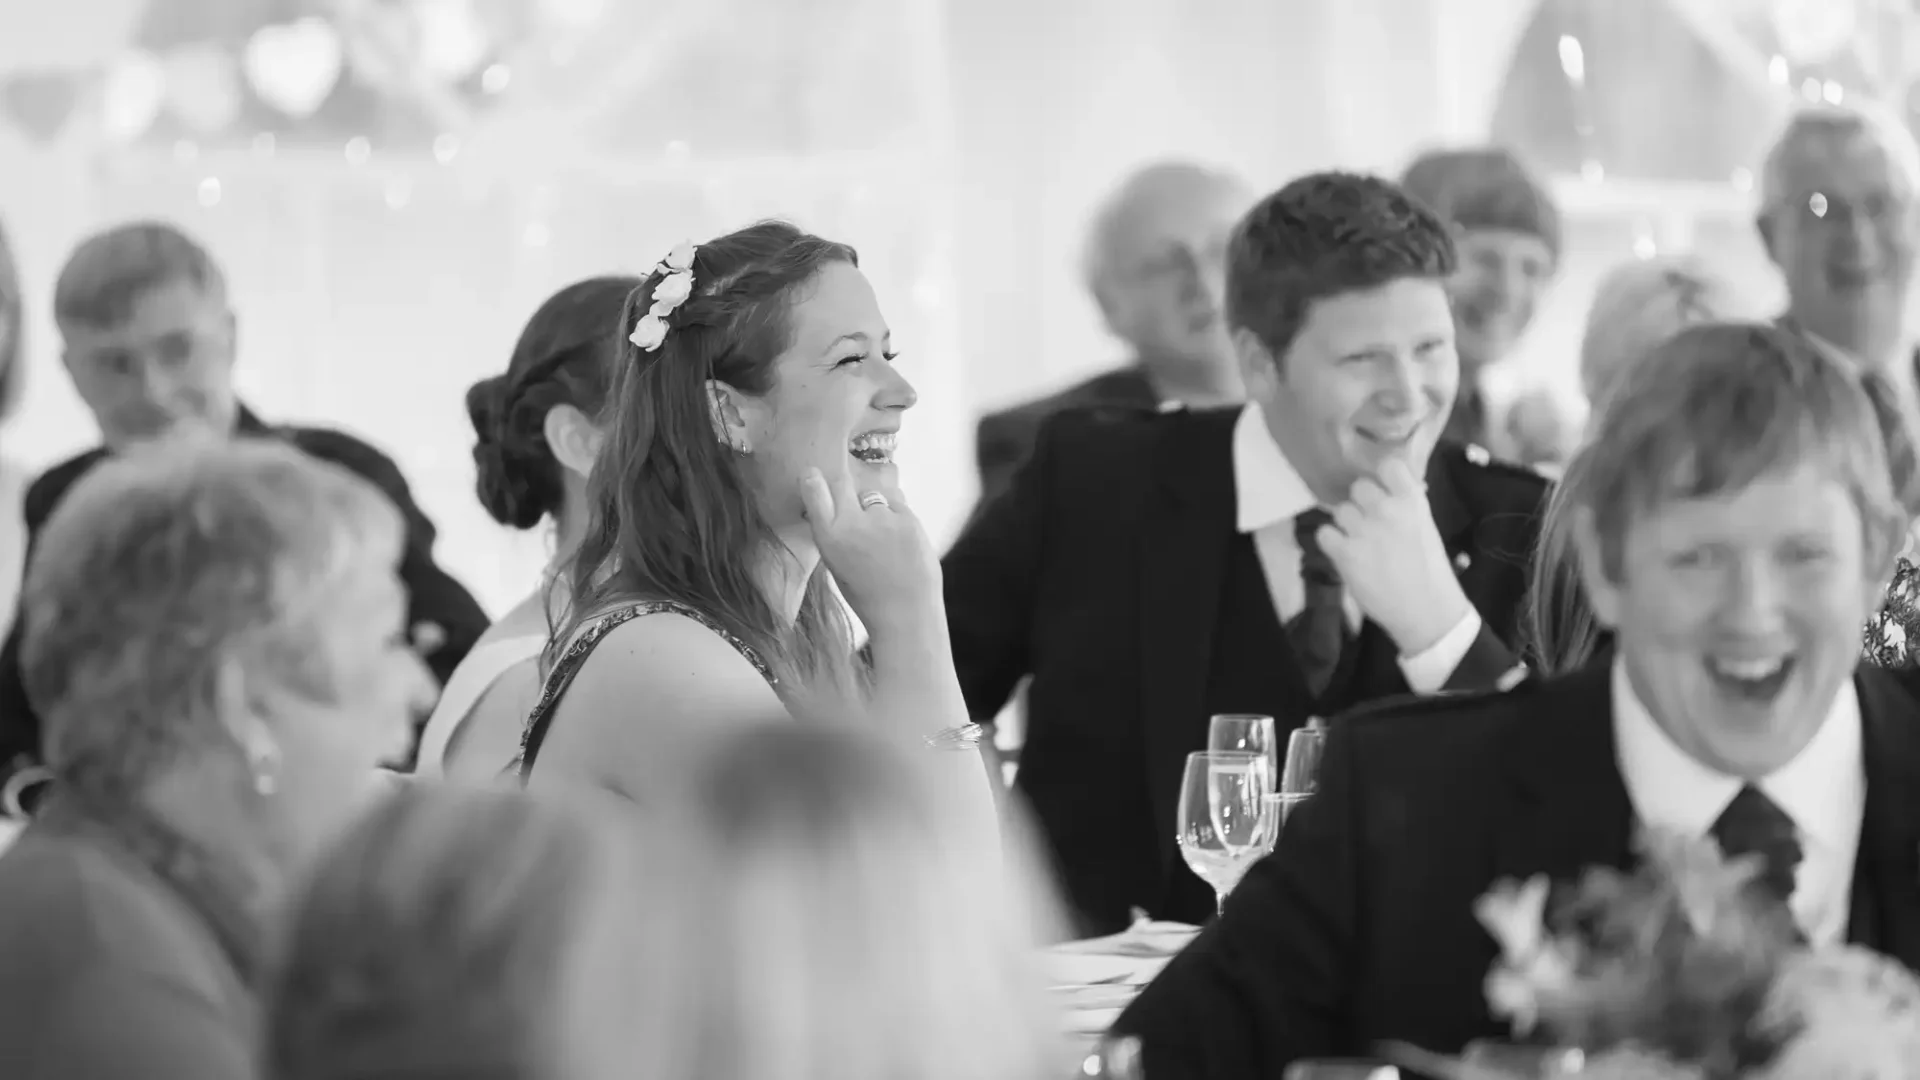 A black and white photo of a smiling woman with a floral hair accessory at a lively event, surrounded by guests laughing and conversing.